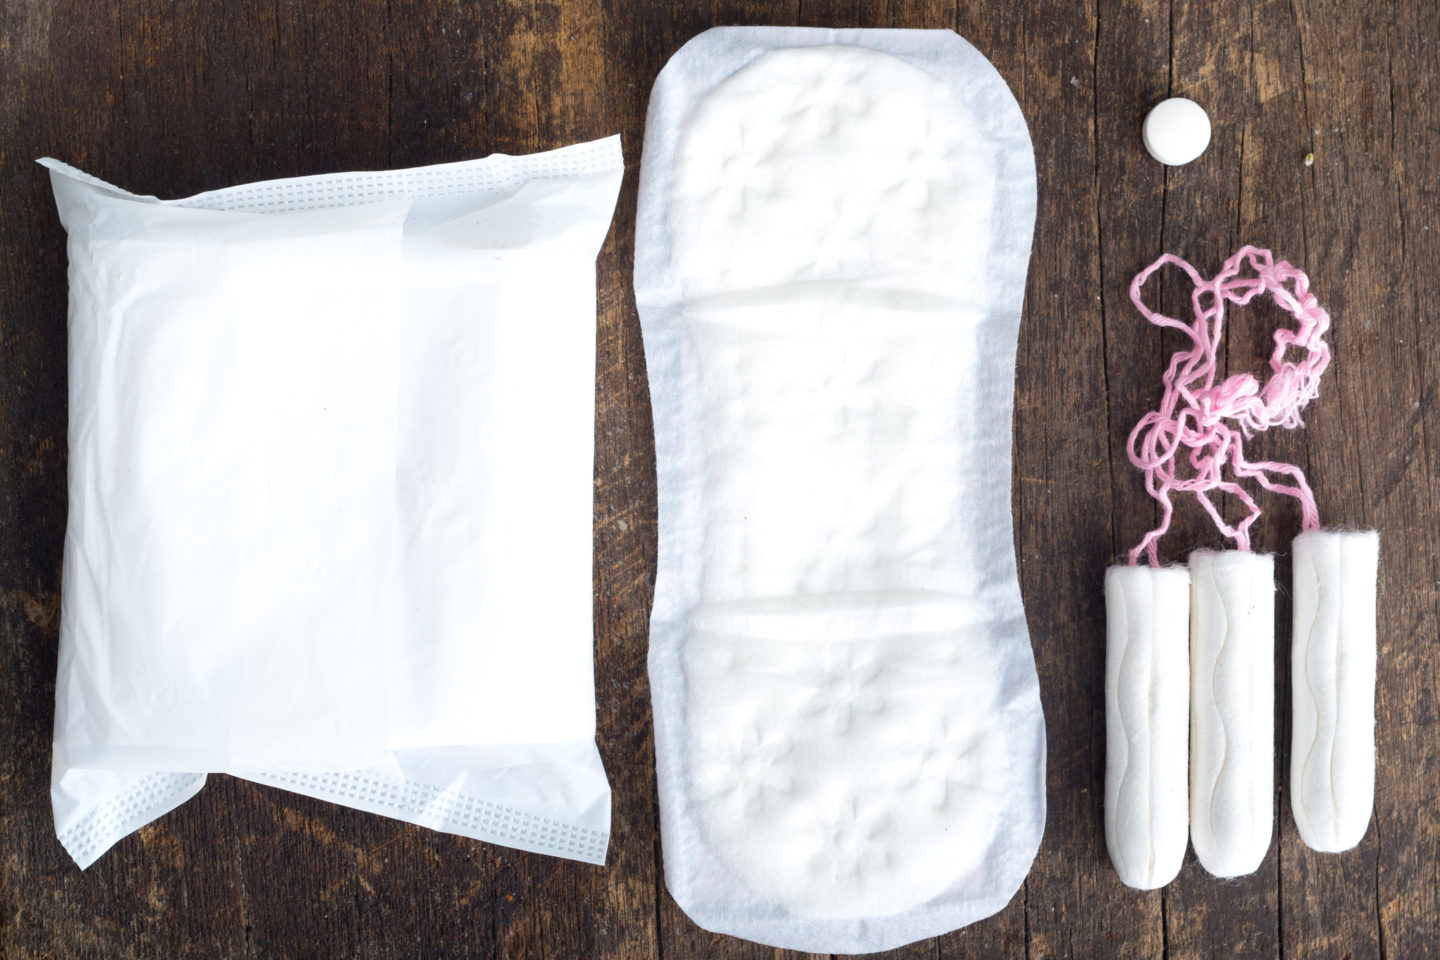 These States No Longer Consider Feminine Hygiene Products A Luxury